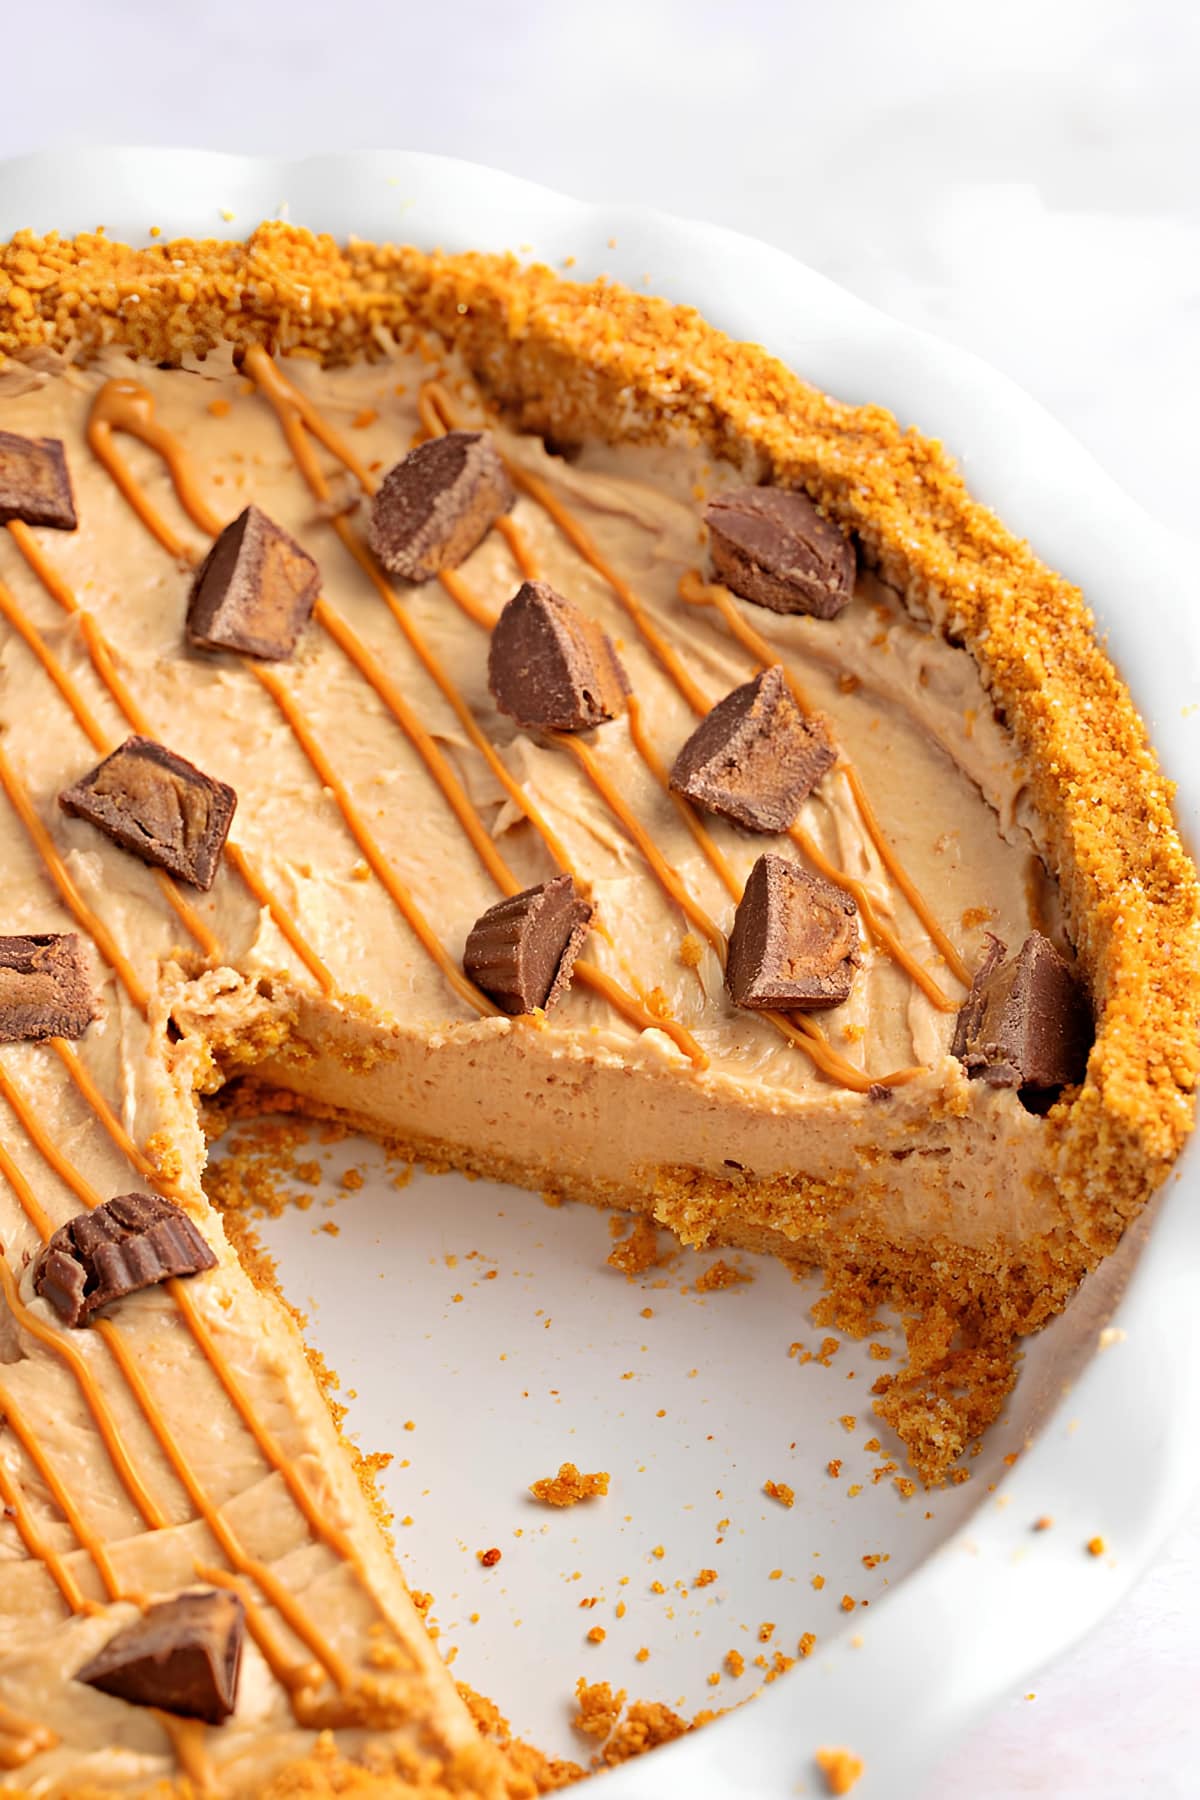 Homemade No-Bake Peanut Butter Pie with Graham Cracker Crust and Chocolate Cups